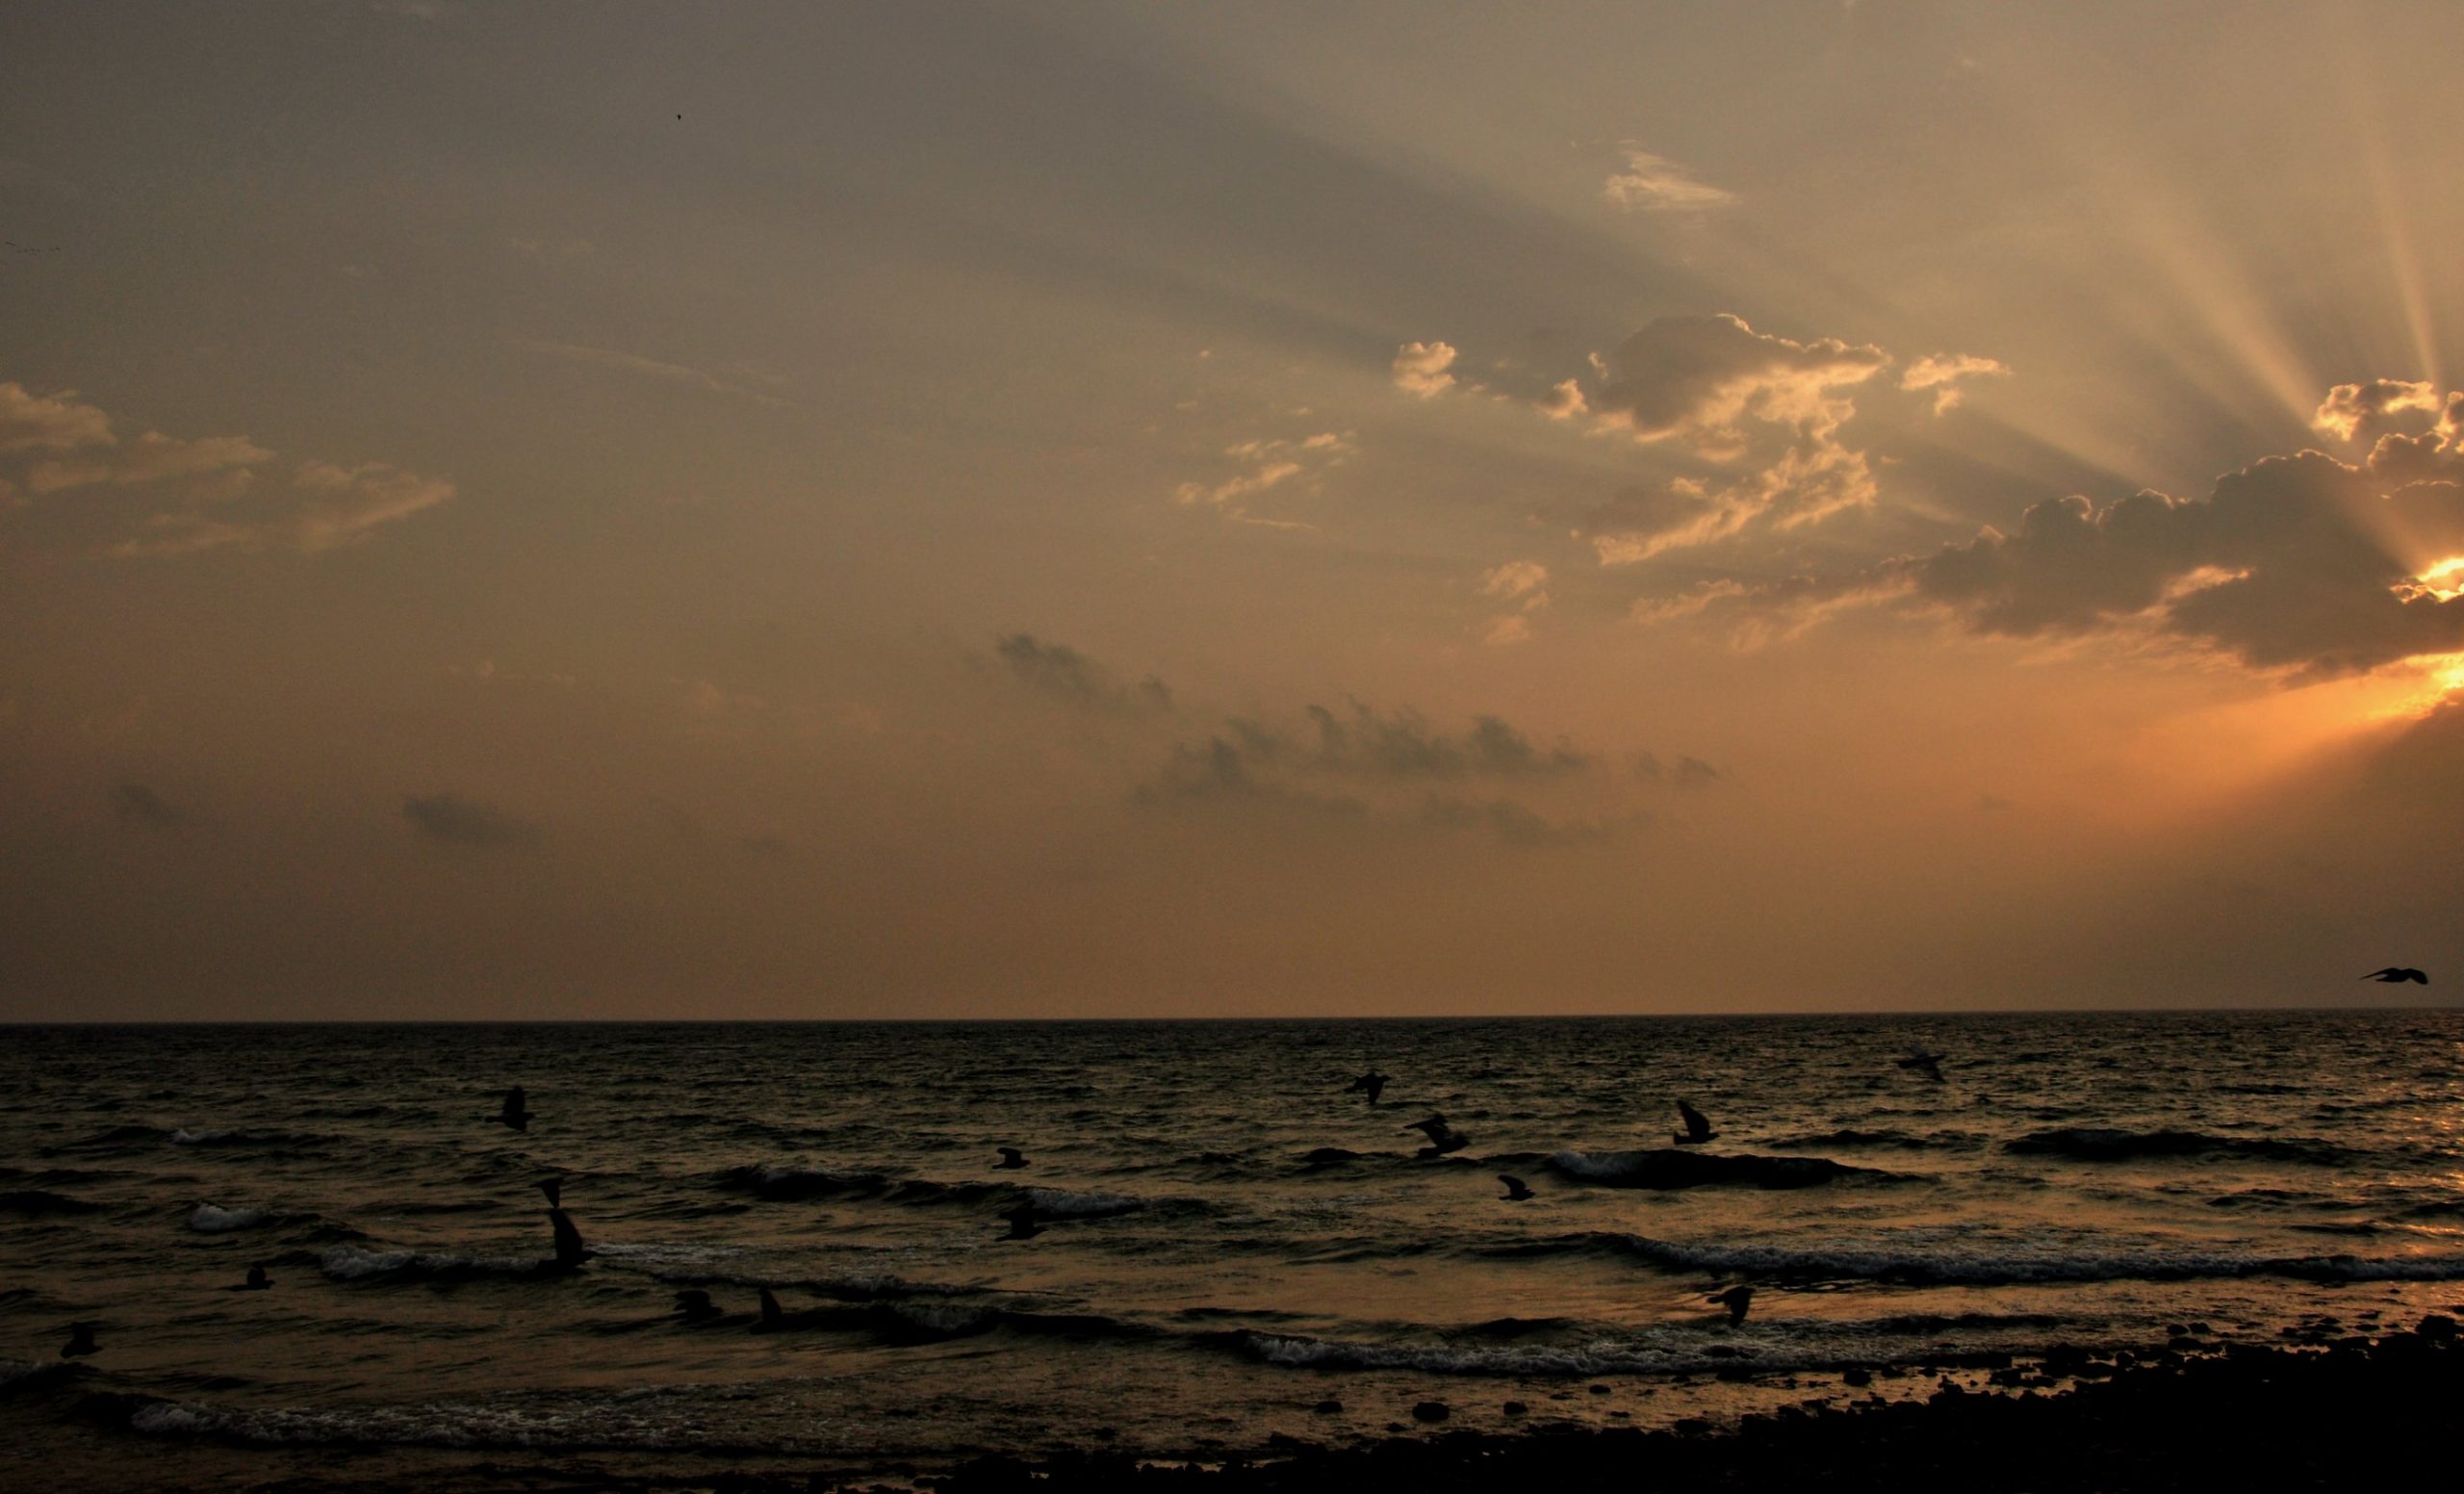 Meditative image showing sunset of coastal waves, flying seagulls, and beach in the foreground.